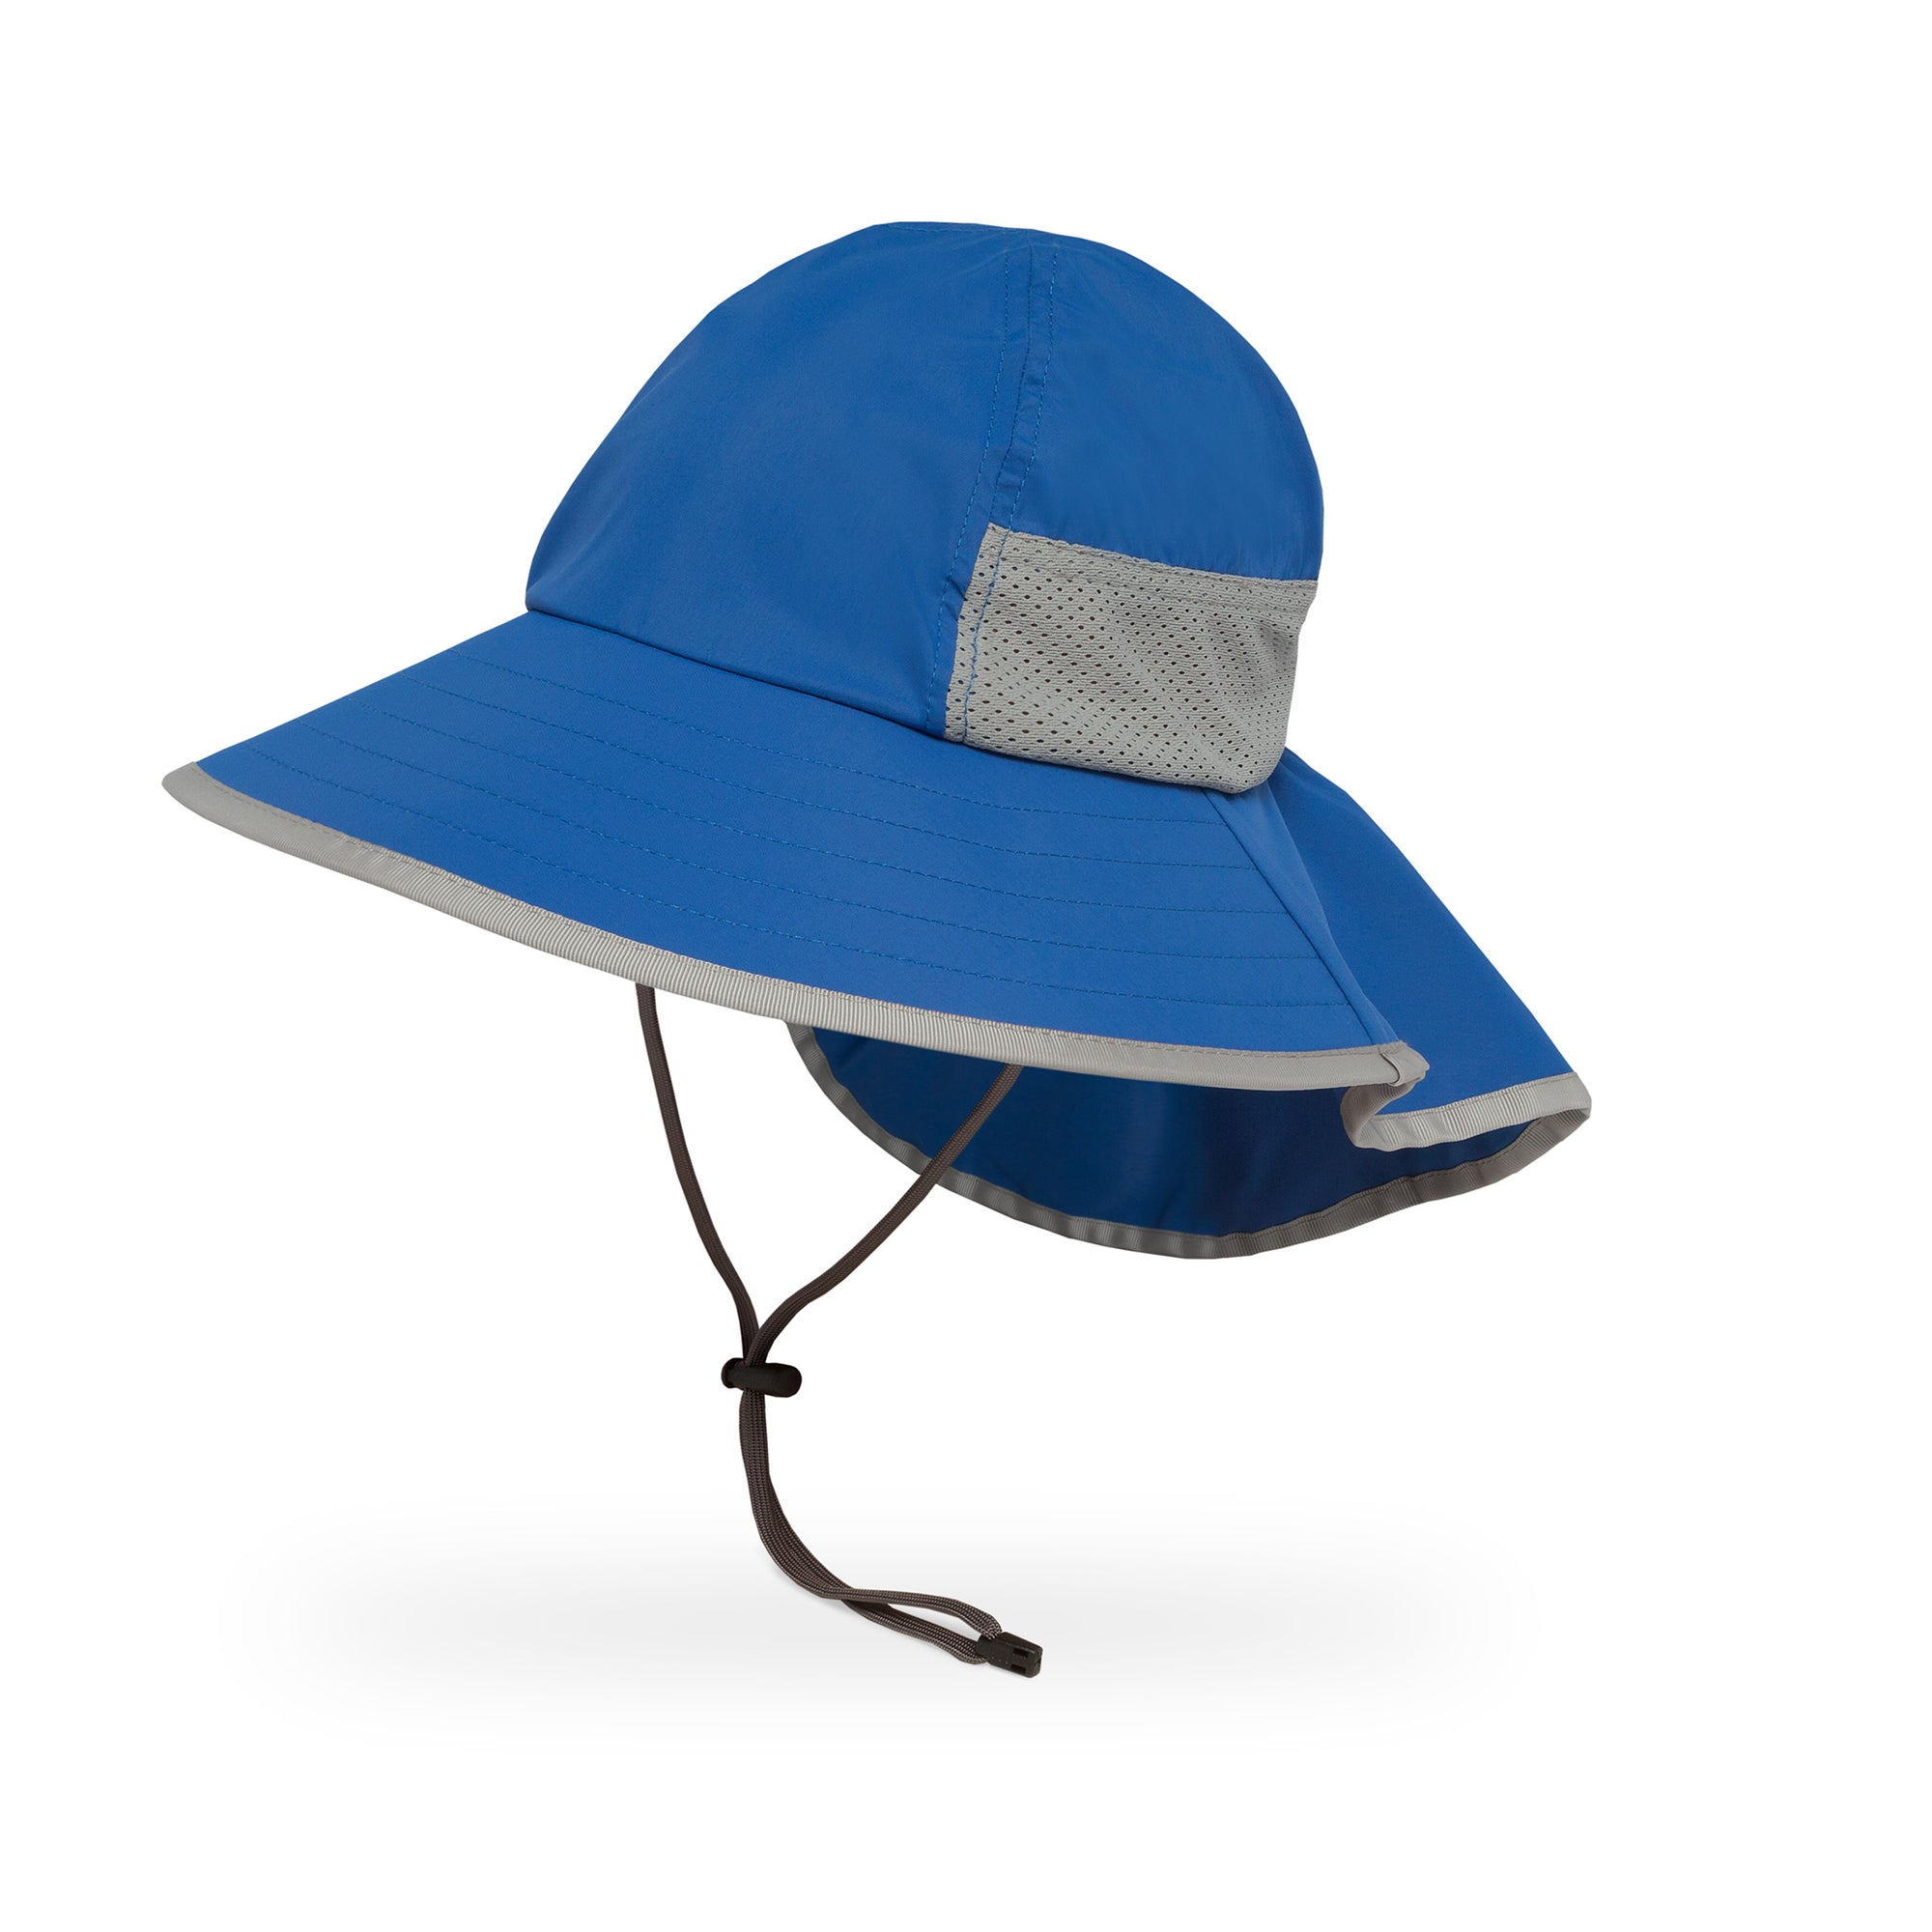 the sunday afternoons kids play hat in the color royal blue